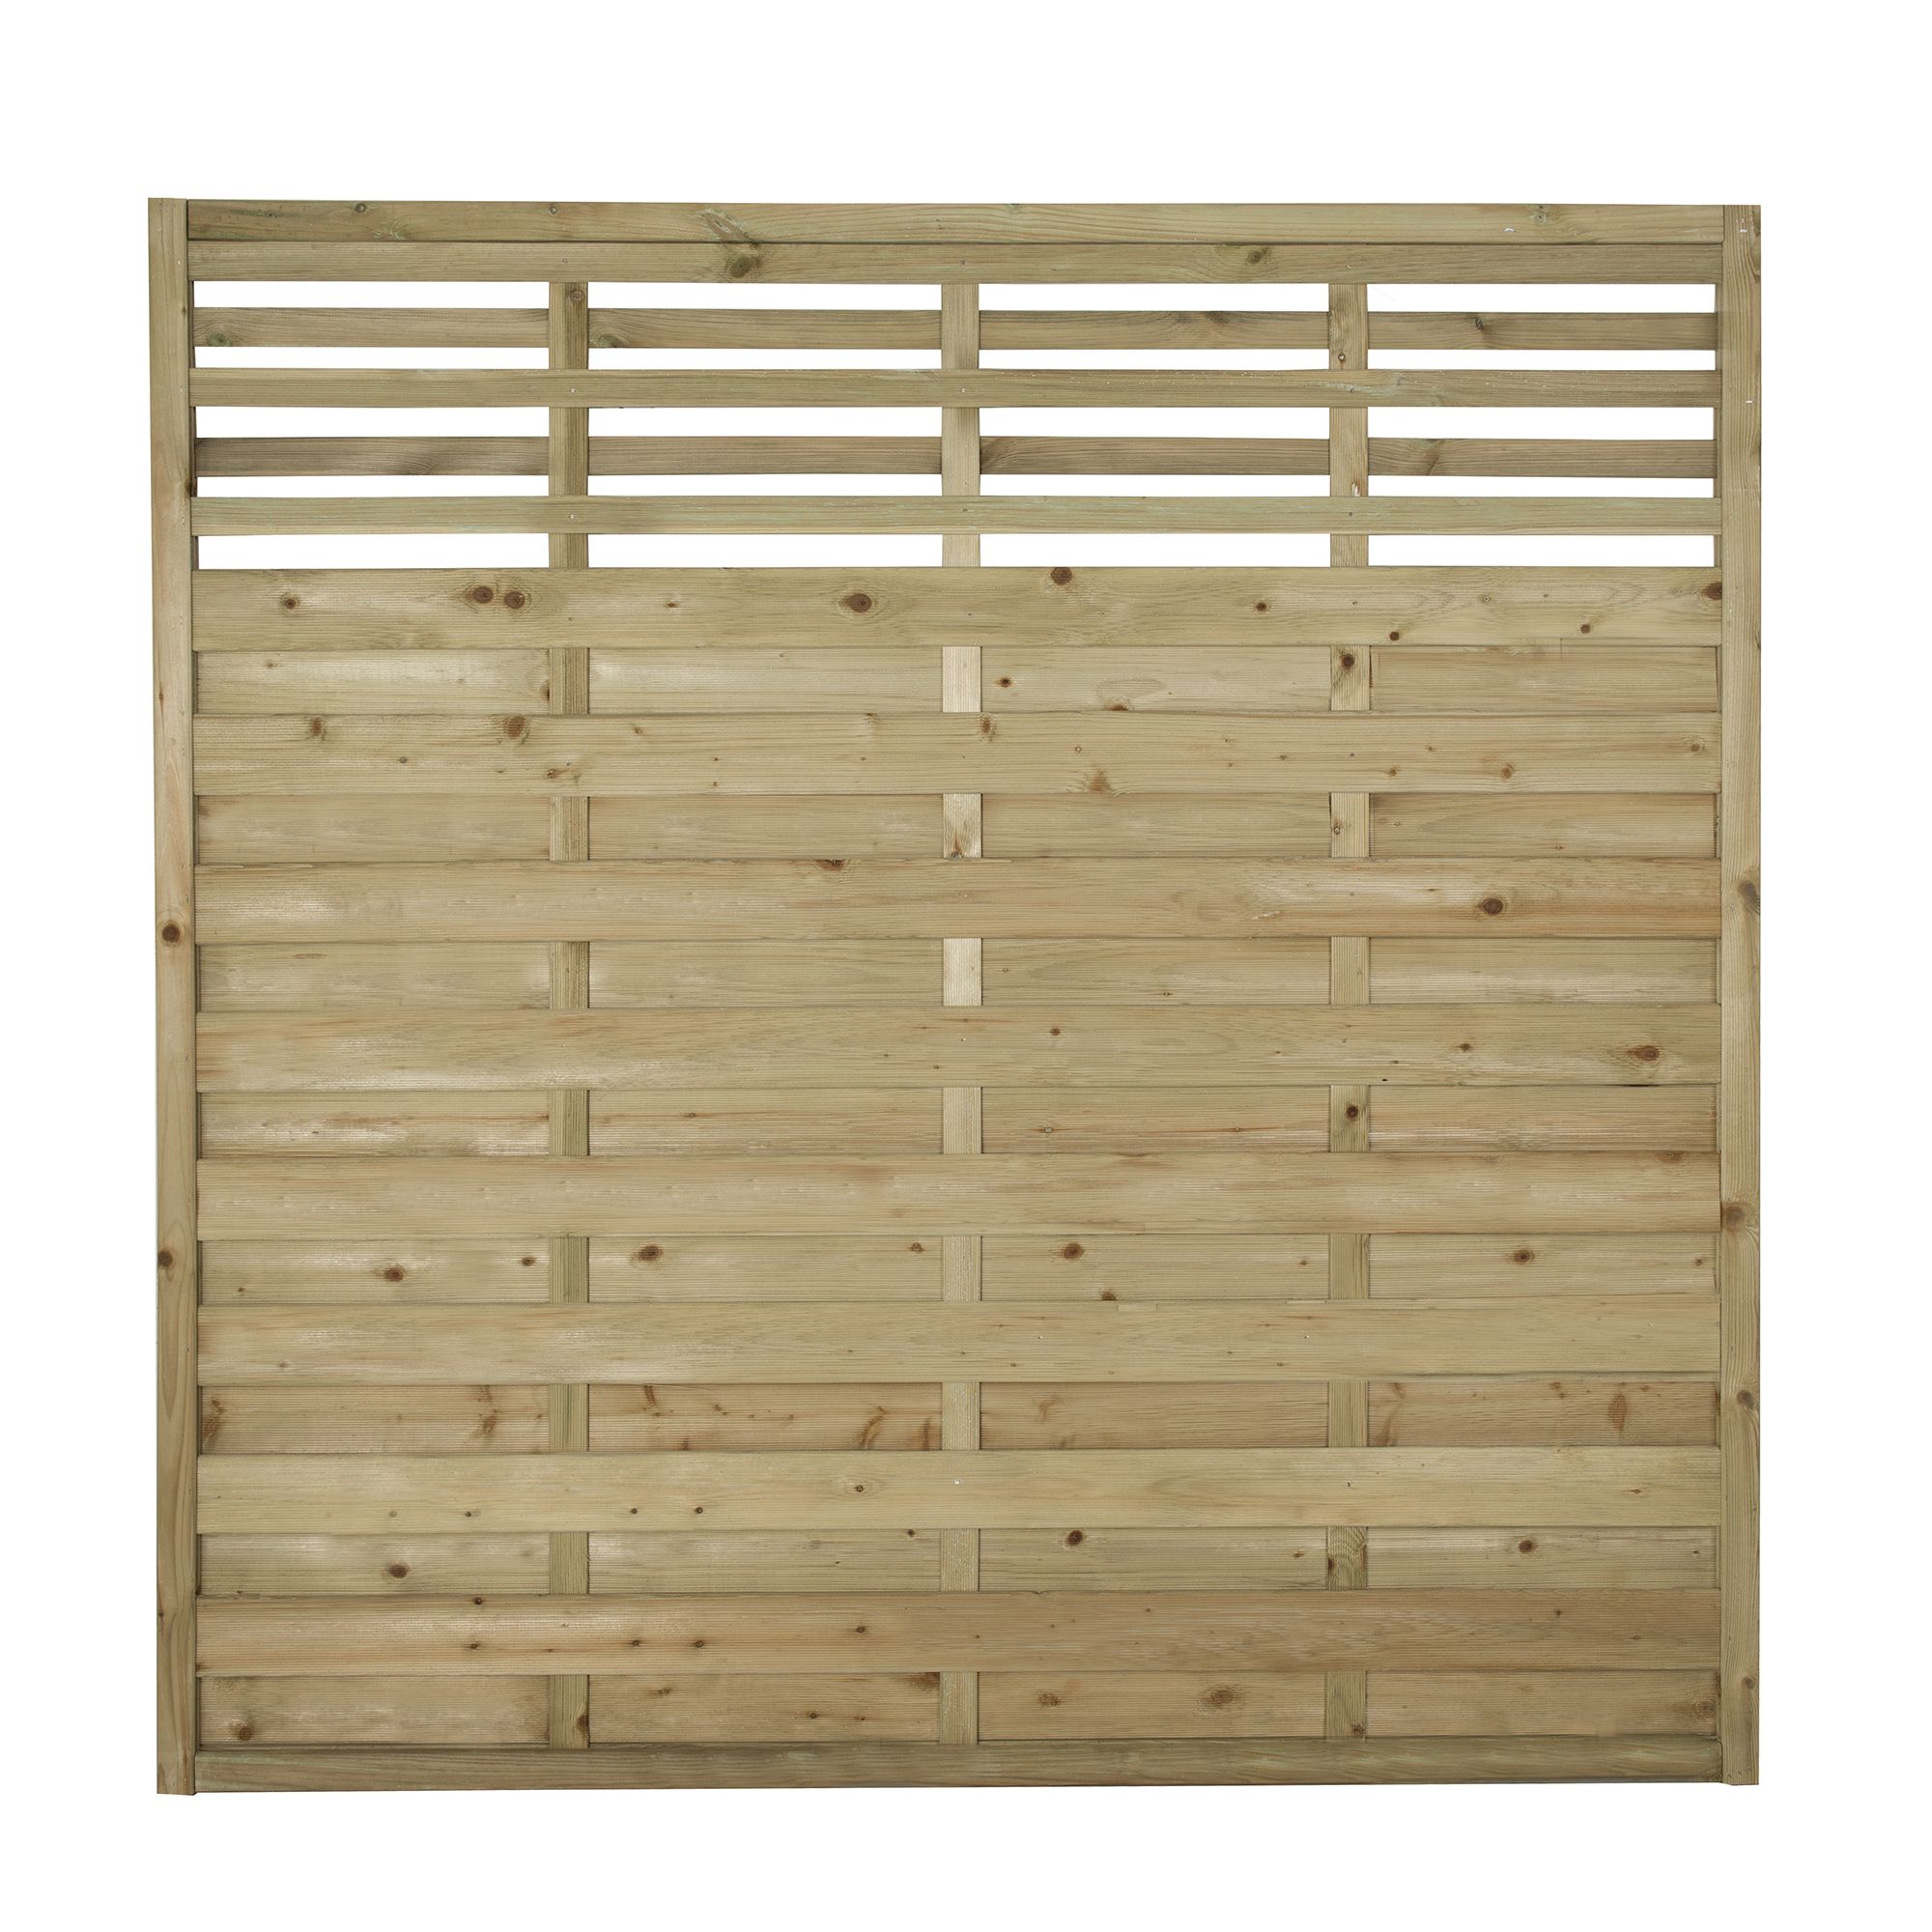 Forest Garden Contemporary Slatted Pressure treated Wooden Fence panel (W)1.8m (H)1.8m, Pack of 5